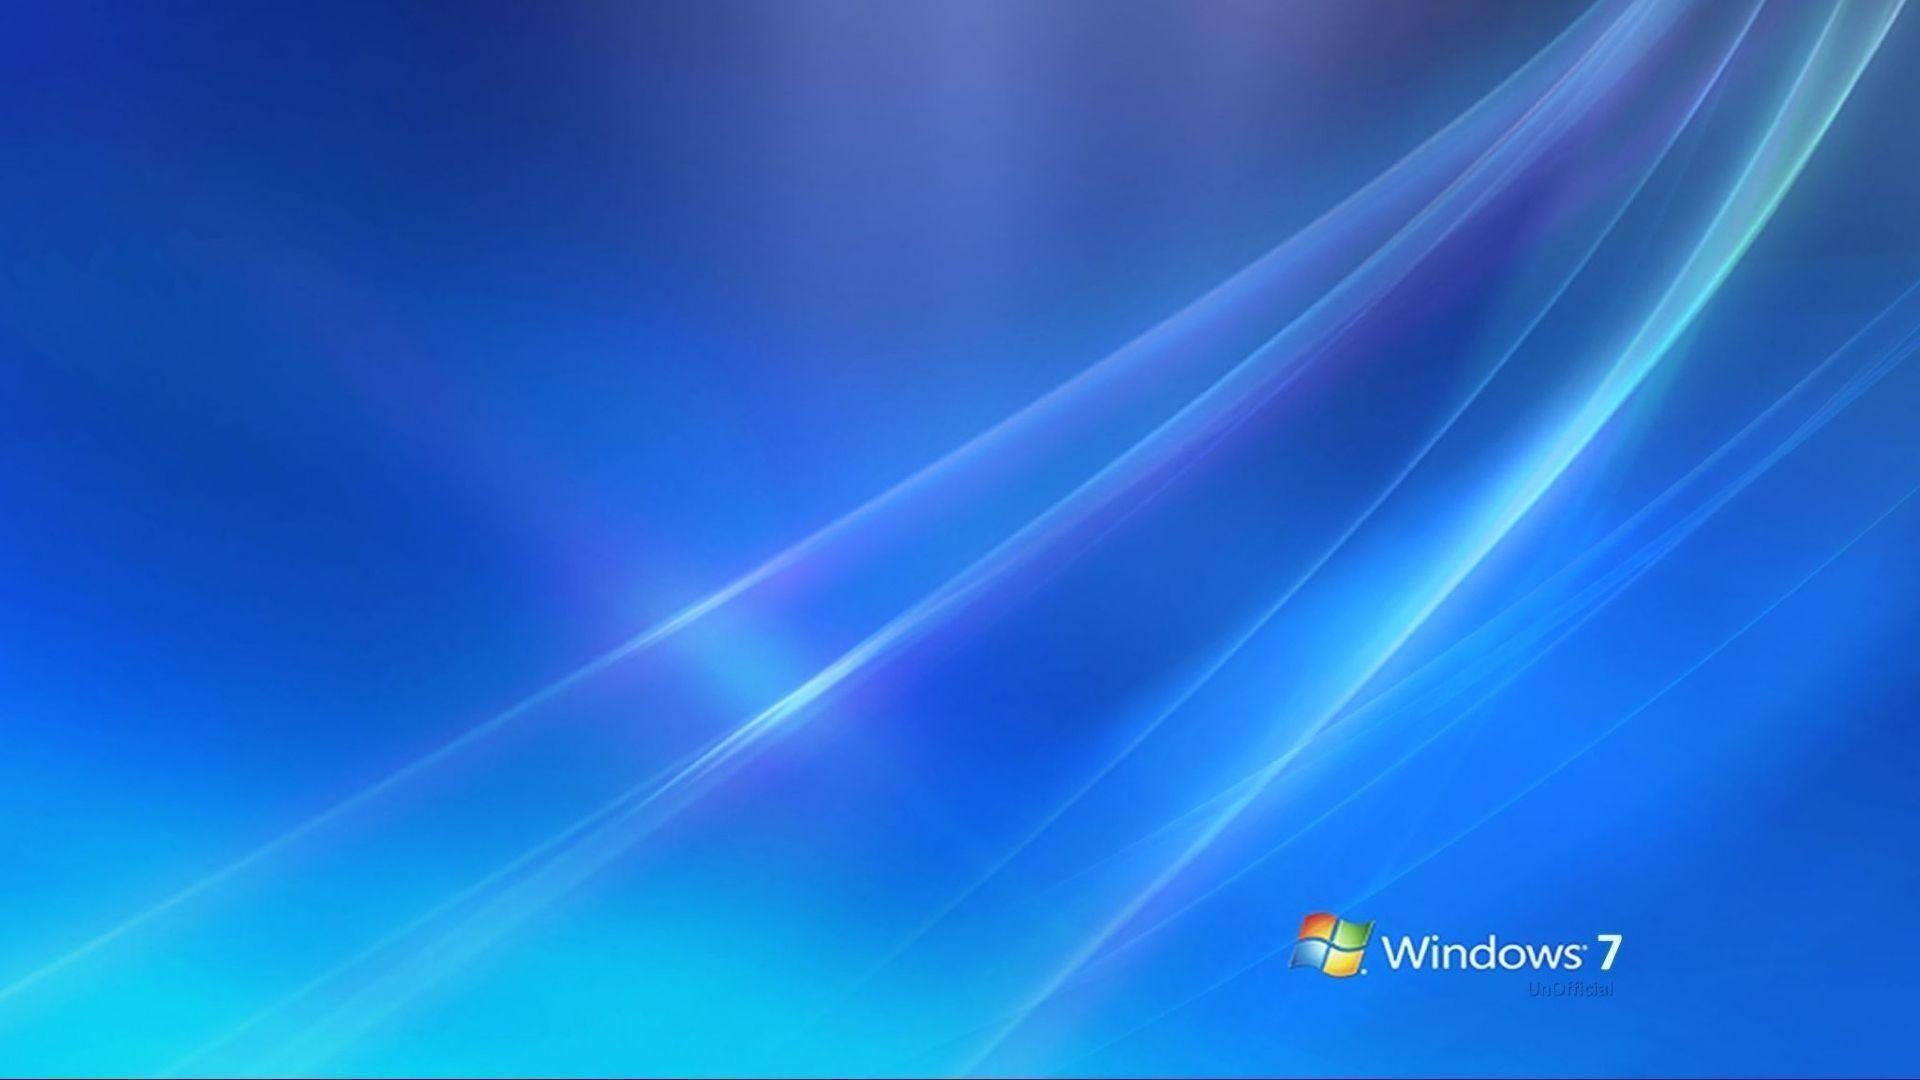 Windows screen ultimate computer background image 1920x1080 px